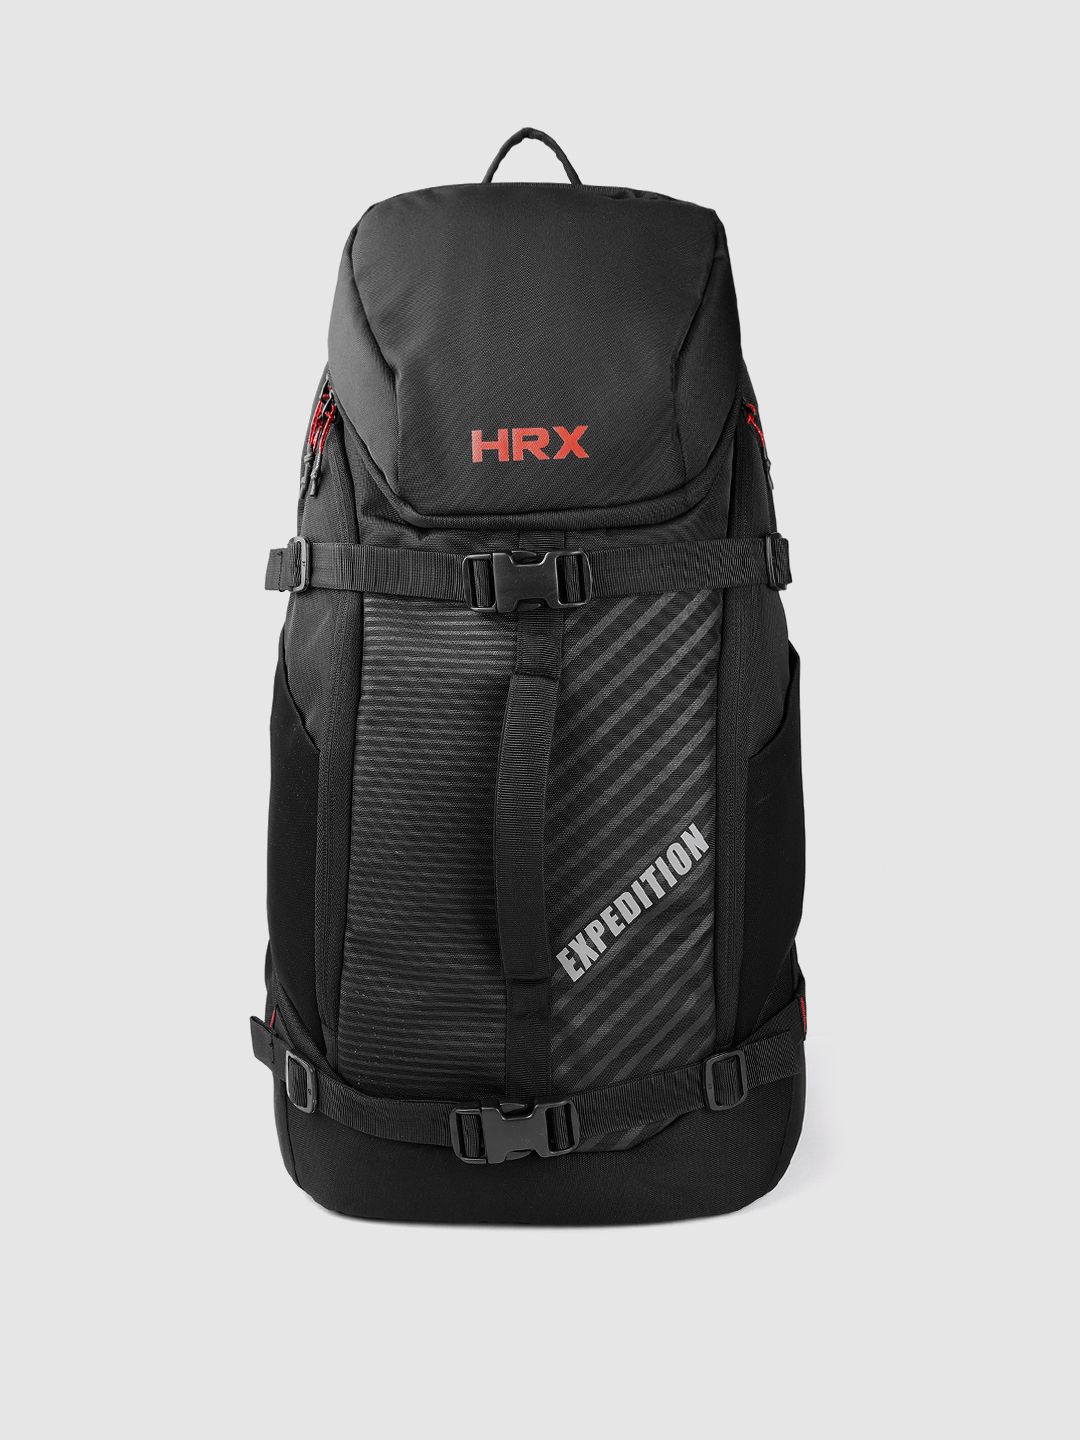 HRX by Hrithik Roshan Unisex Black & Red Striped Backpack with Reflective Strip Price in India